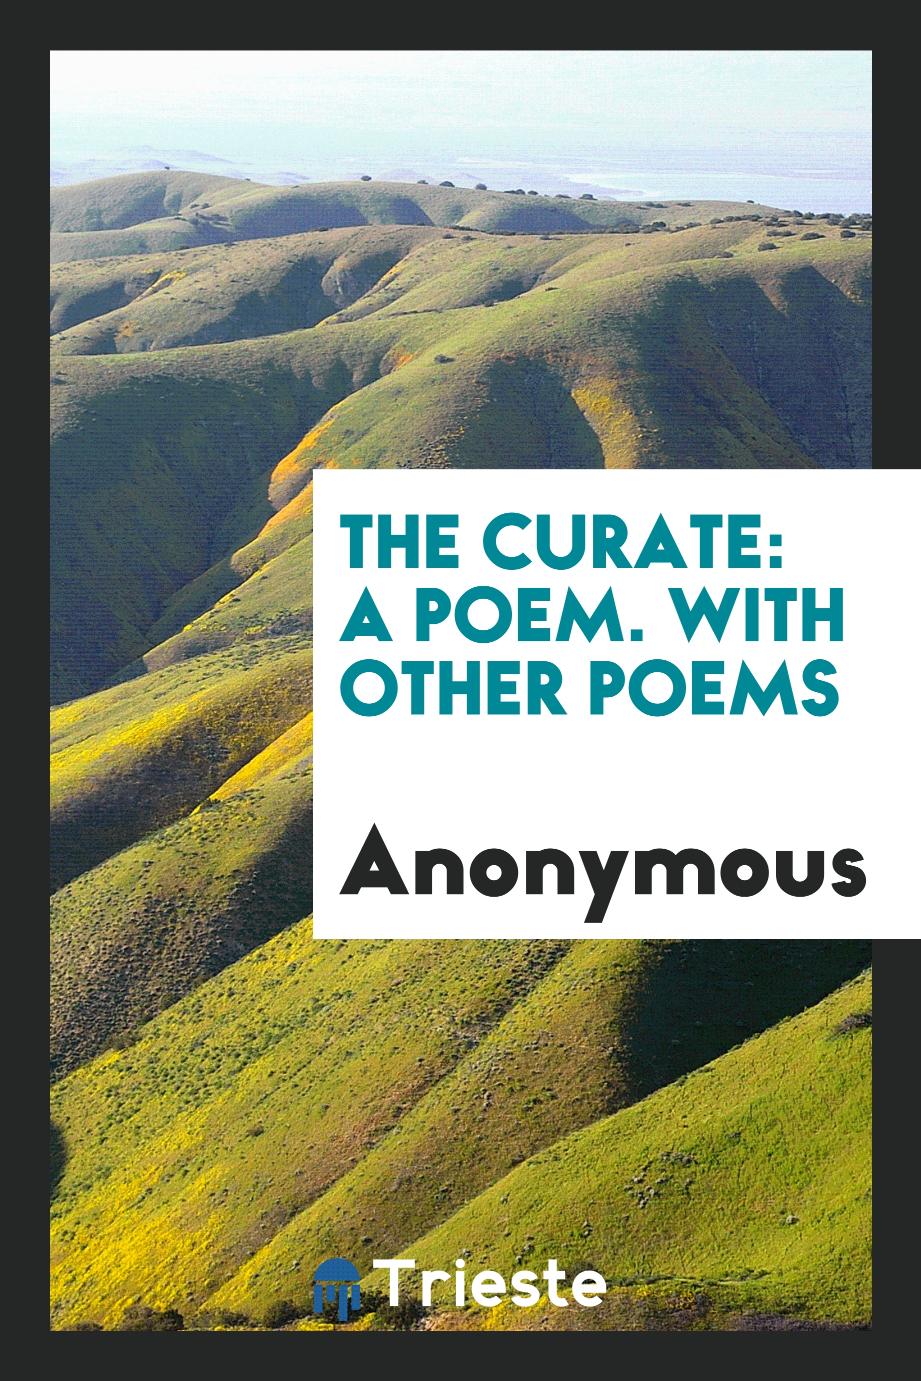 The Curate: A Poem. With Other Poems